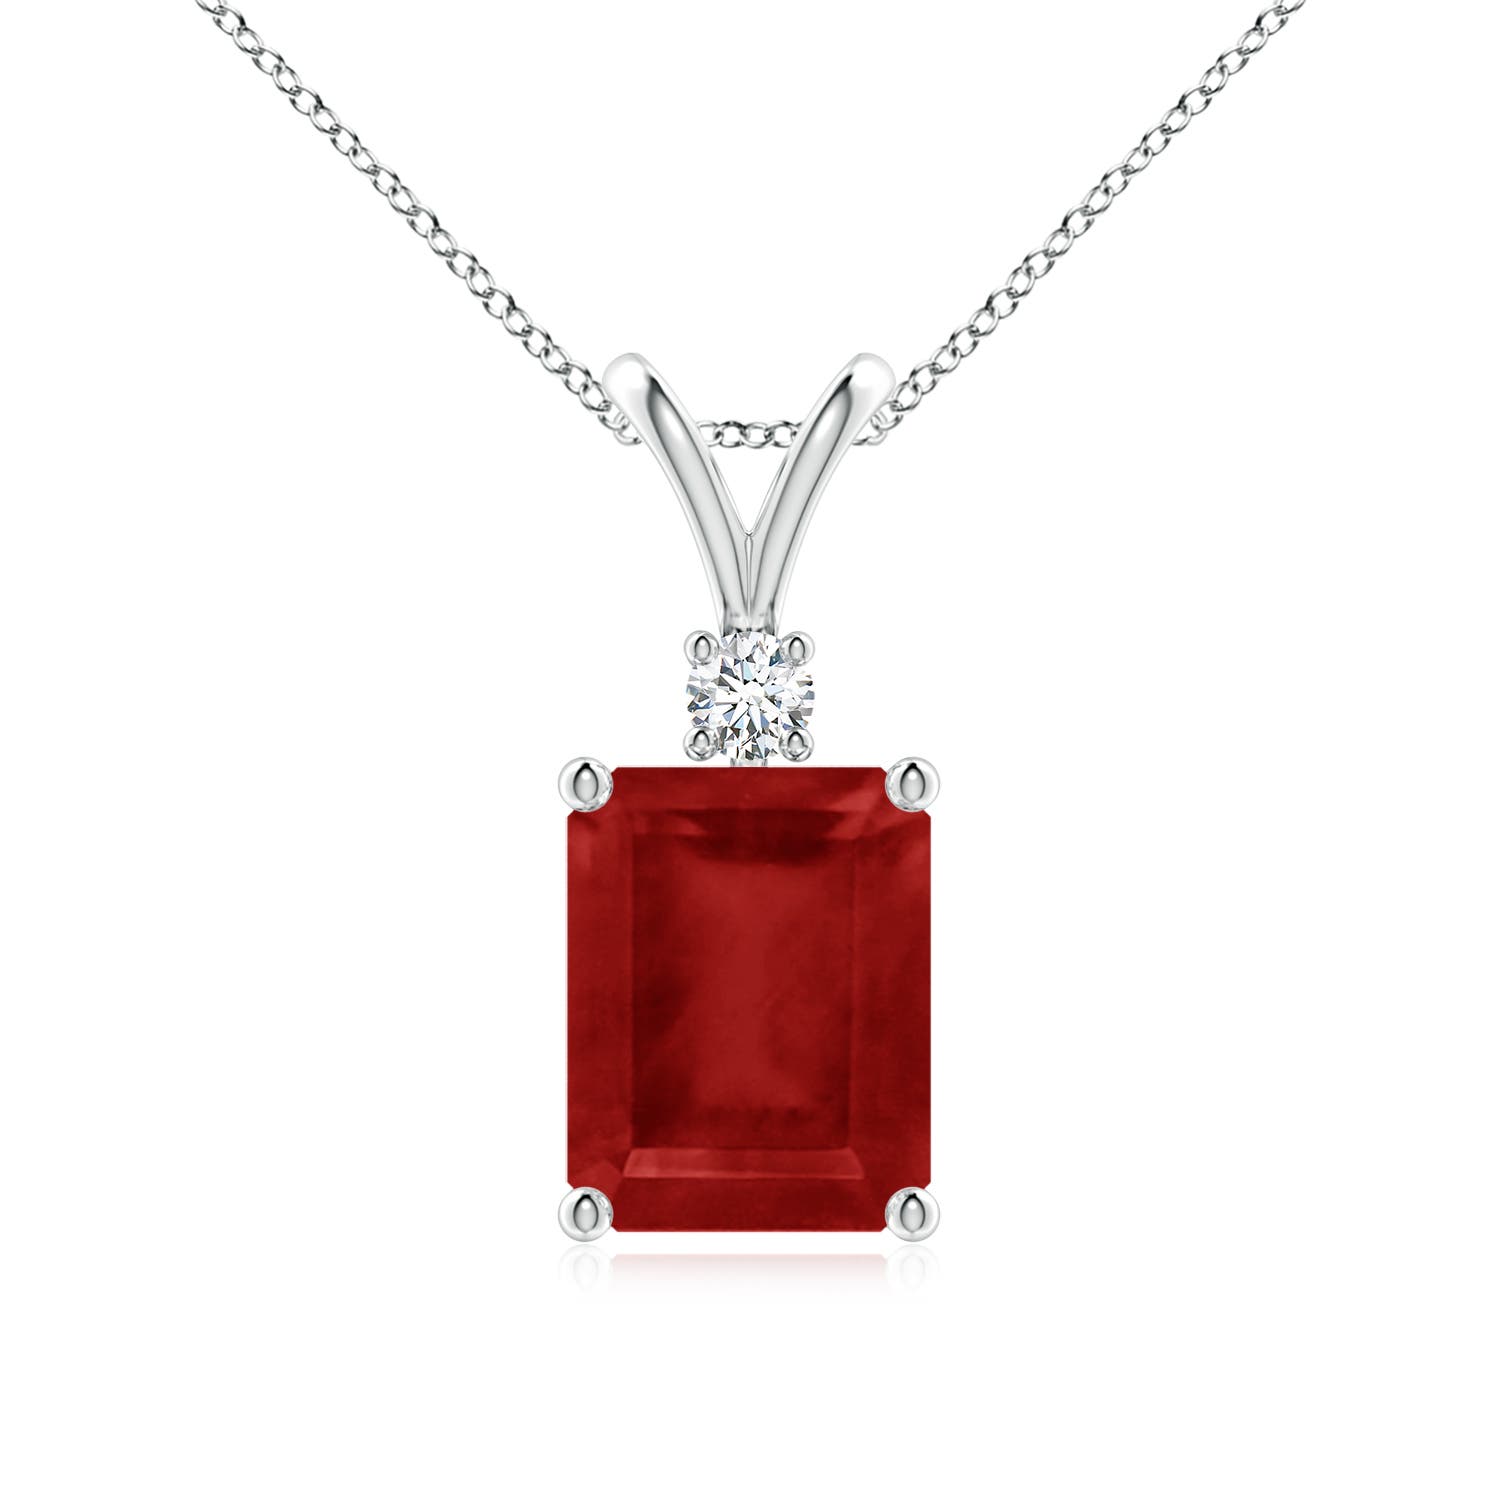 AA - Ruby / 3.07 CT / 14 KT White Gold